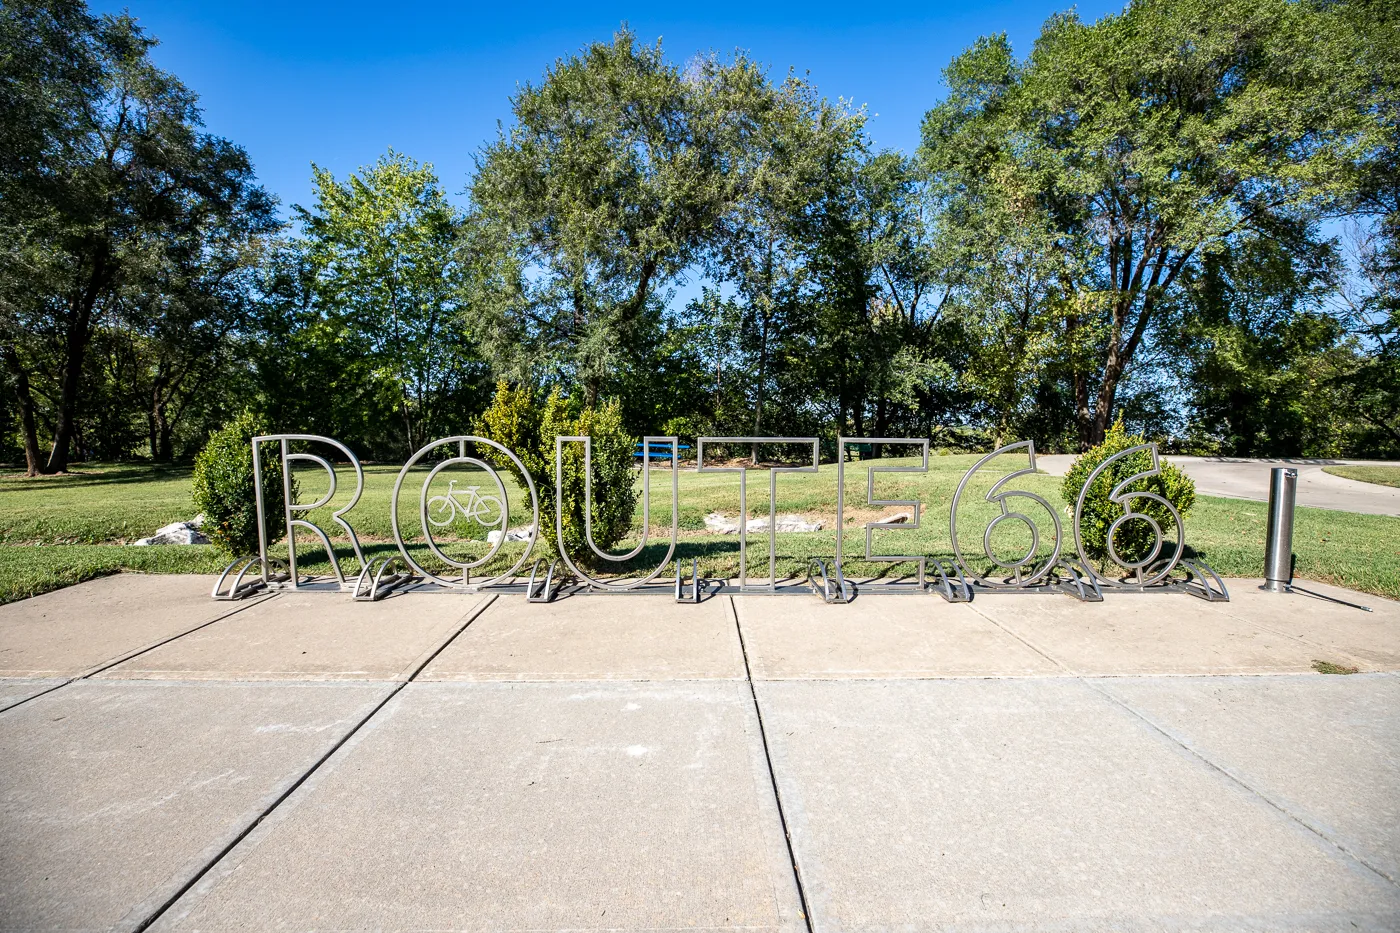 Route 66 bike rack at the Birthplace of Route 66 Roadside Park in Springfield, Missouri